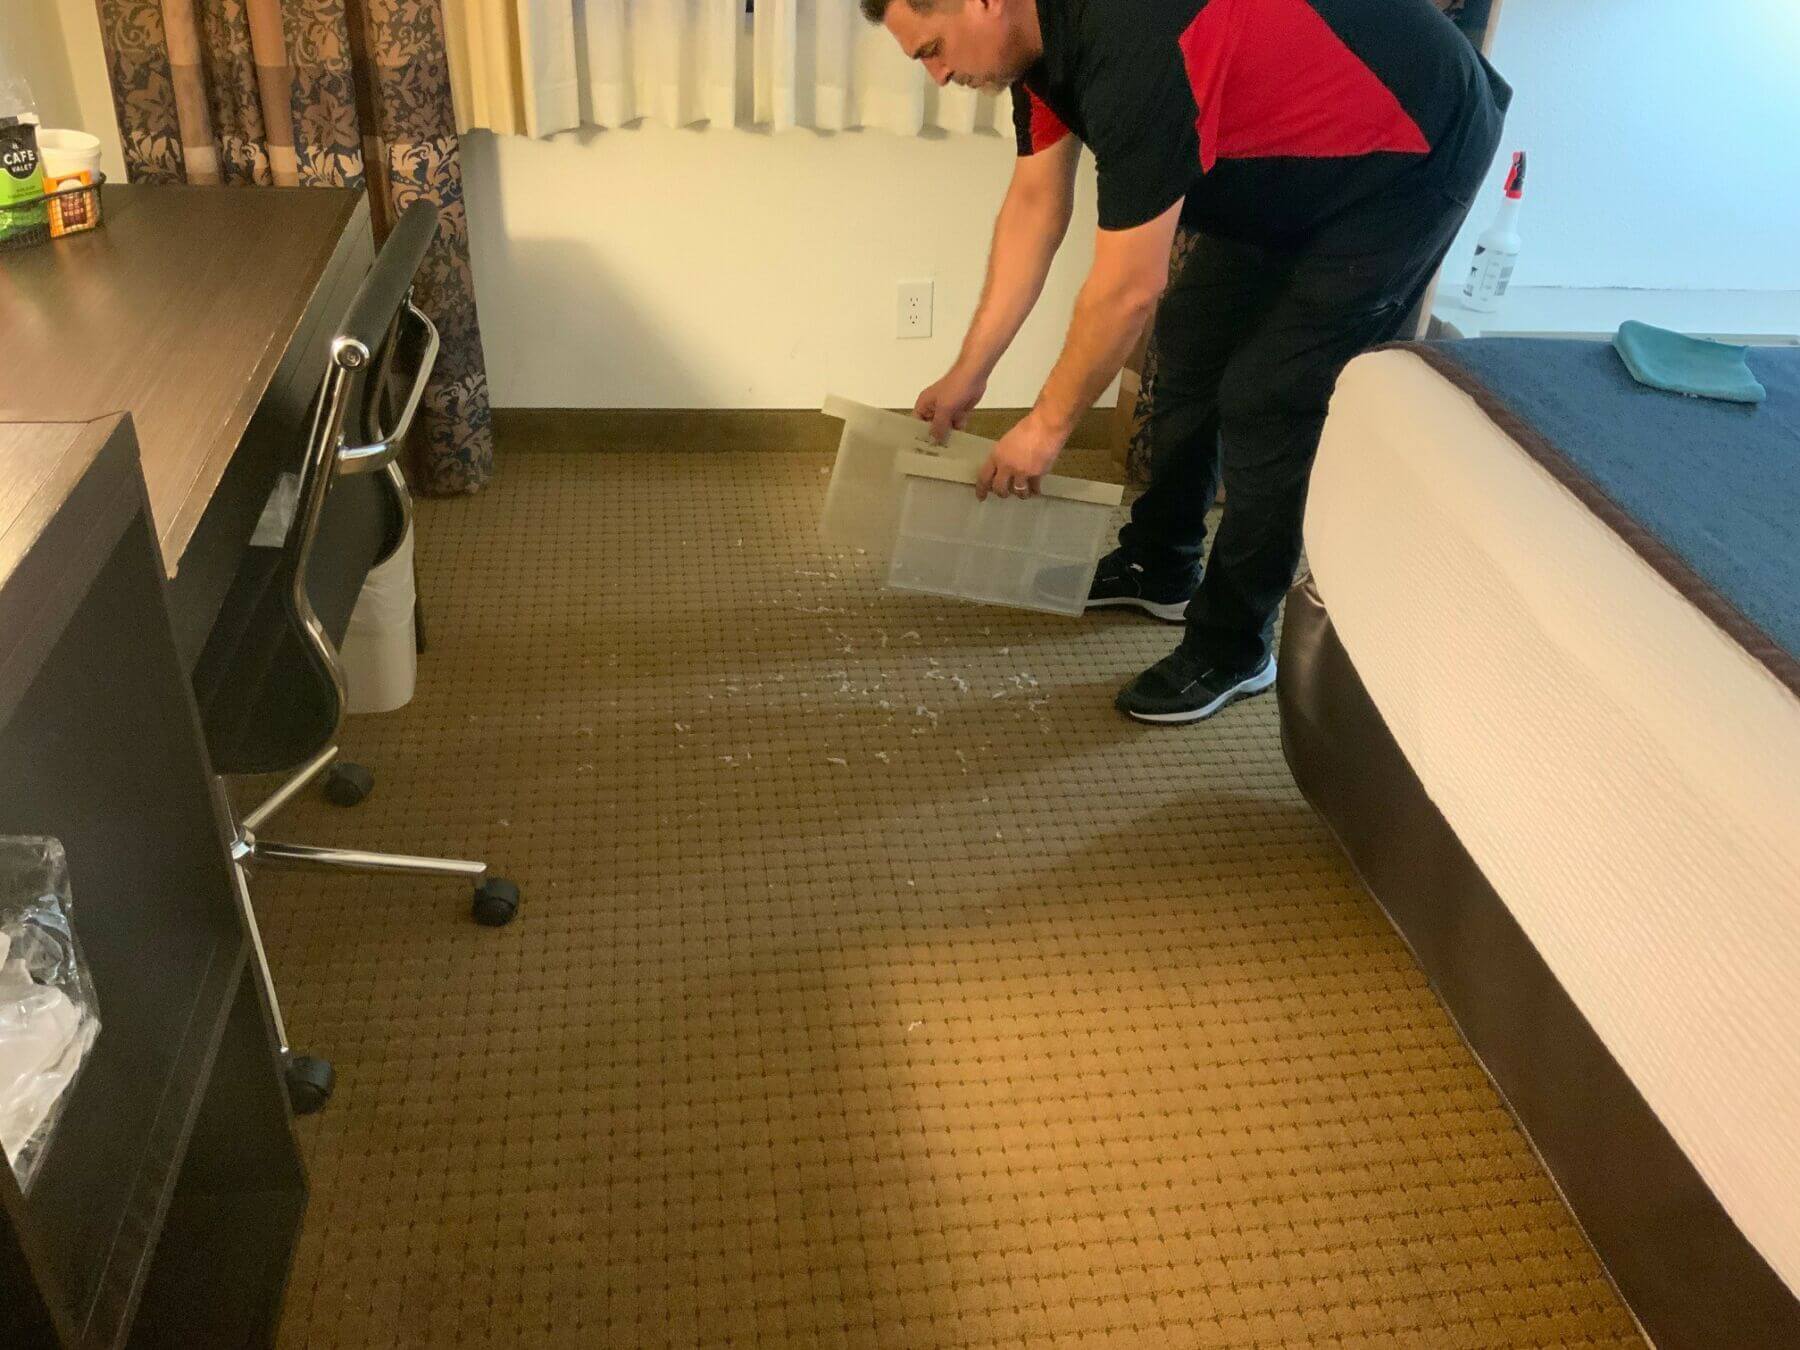 Commercial Hotel Cleaning Service, Hotel Cleaning Services, Outsourced Hotel Cleaning Services, Commercial Hotel Cleaning